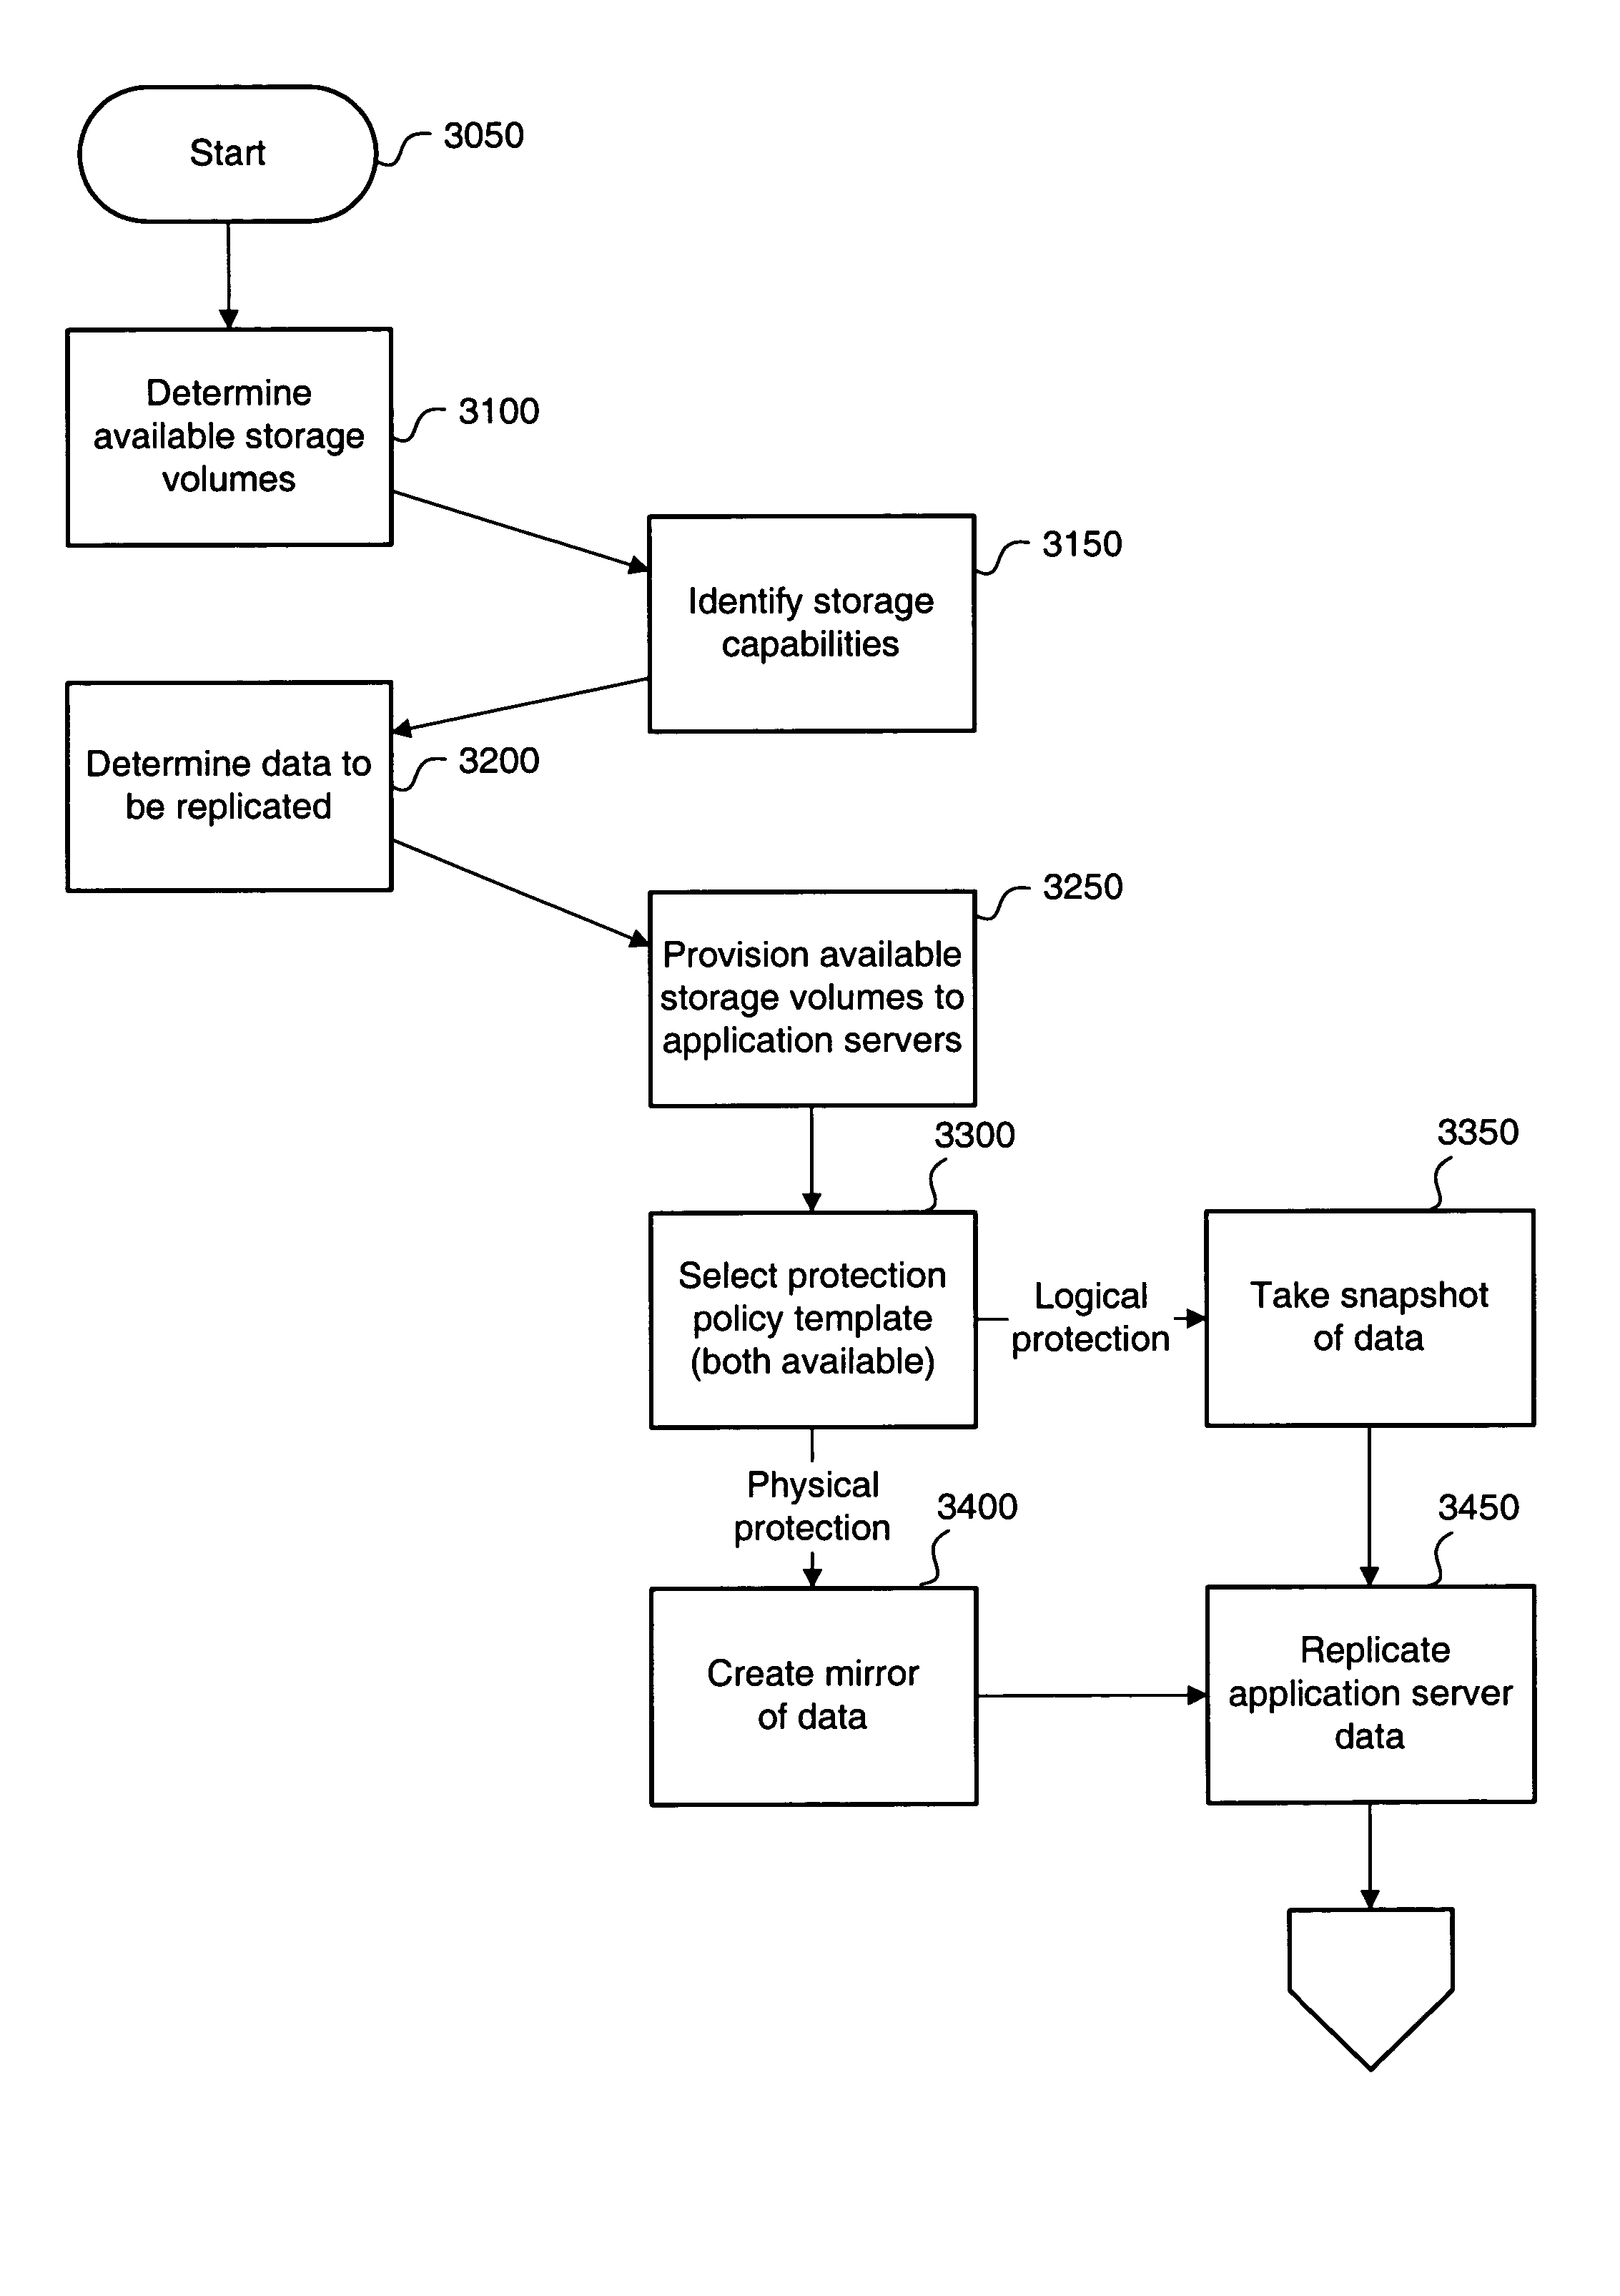 Method and apparatus for creating a storage pool by dynamically mapping replication schema to provisioned storage volumes